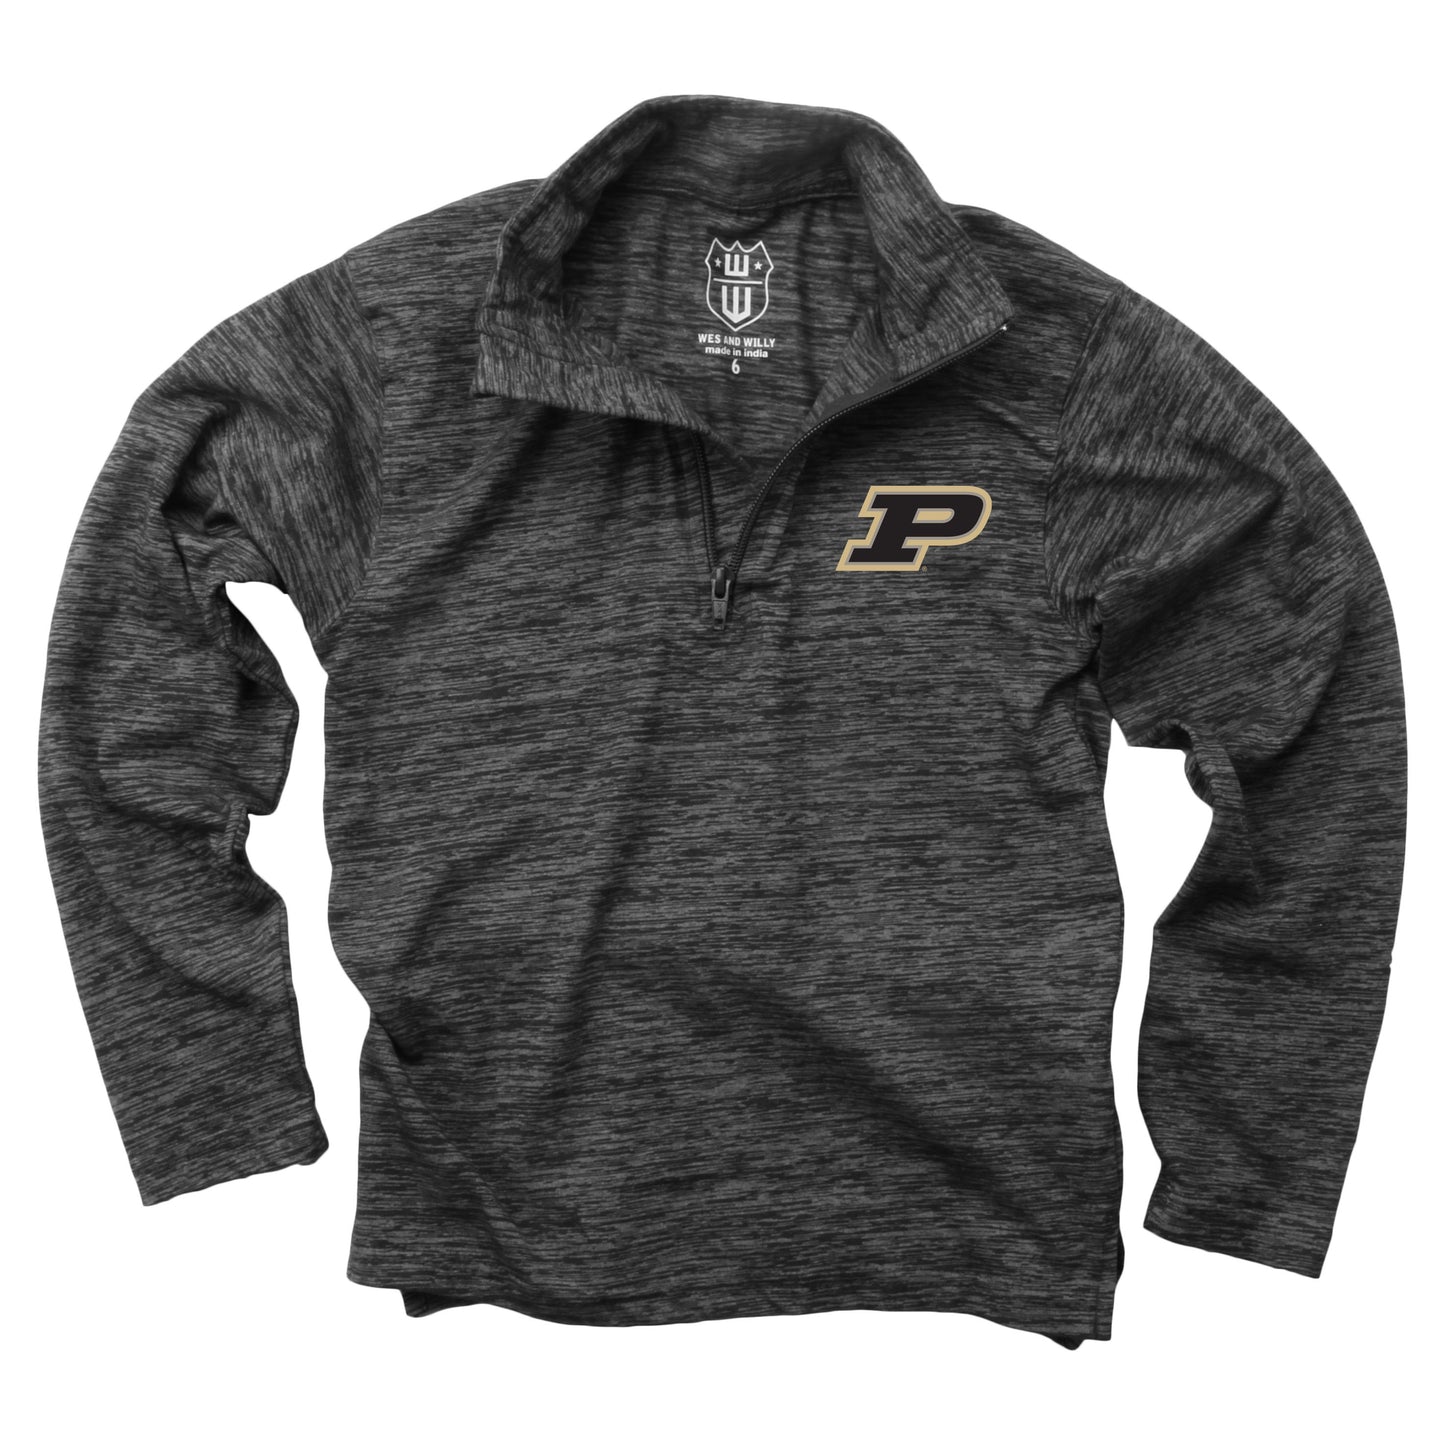 Purdue Boilermakers Wes and Willy Youth Boys Cloudy Yarn Long Sleeve College Quarter Zip